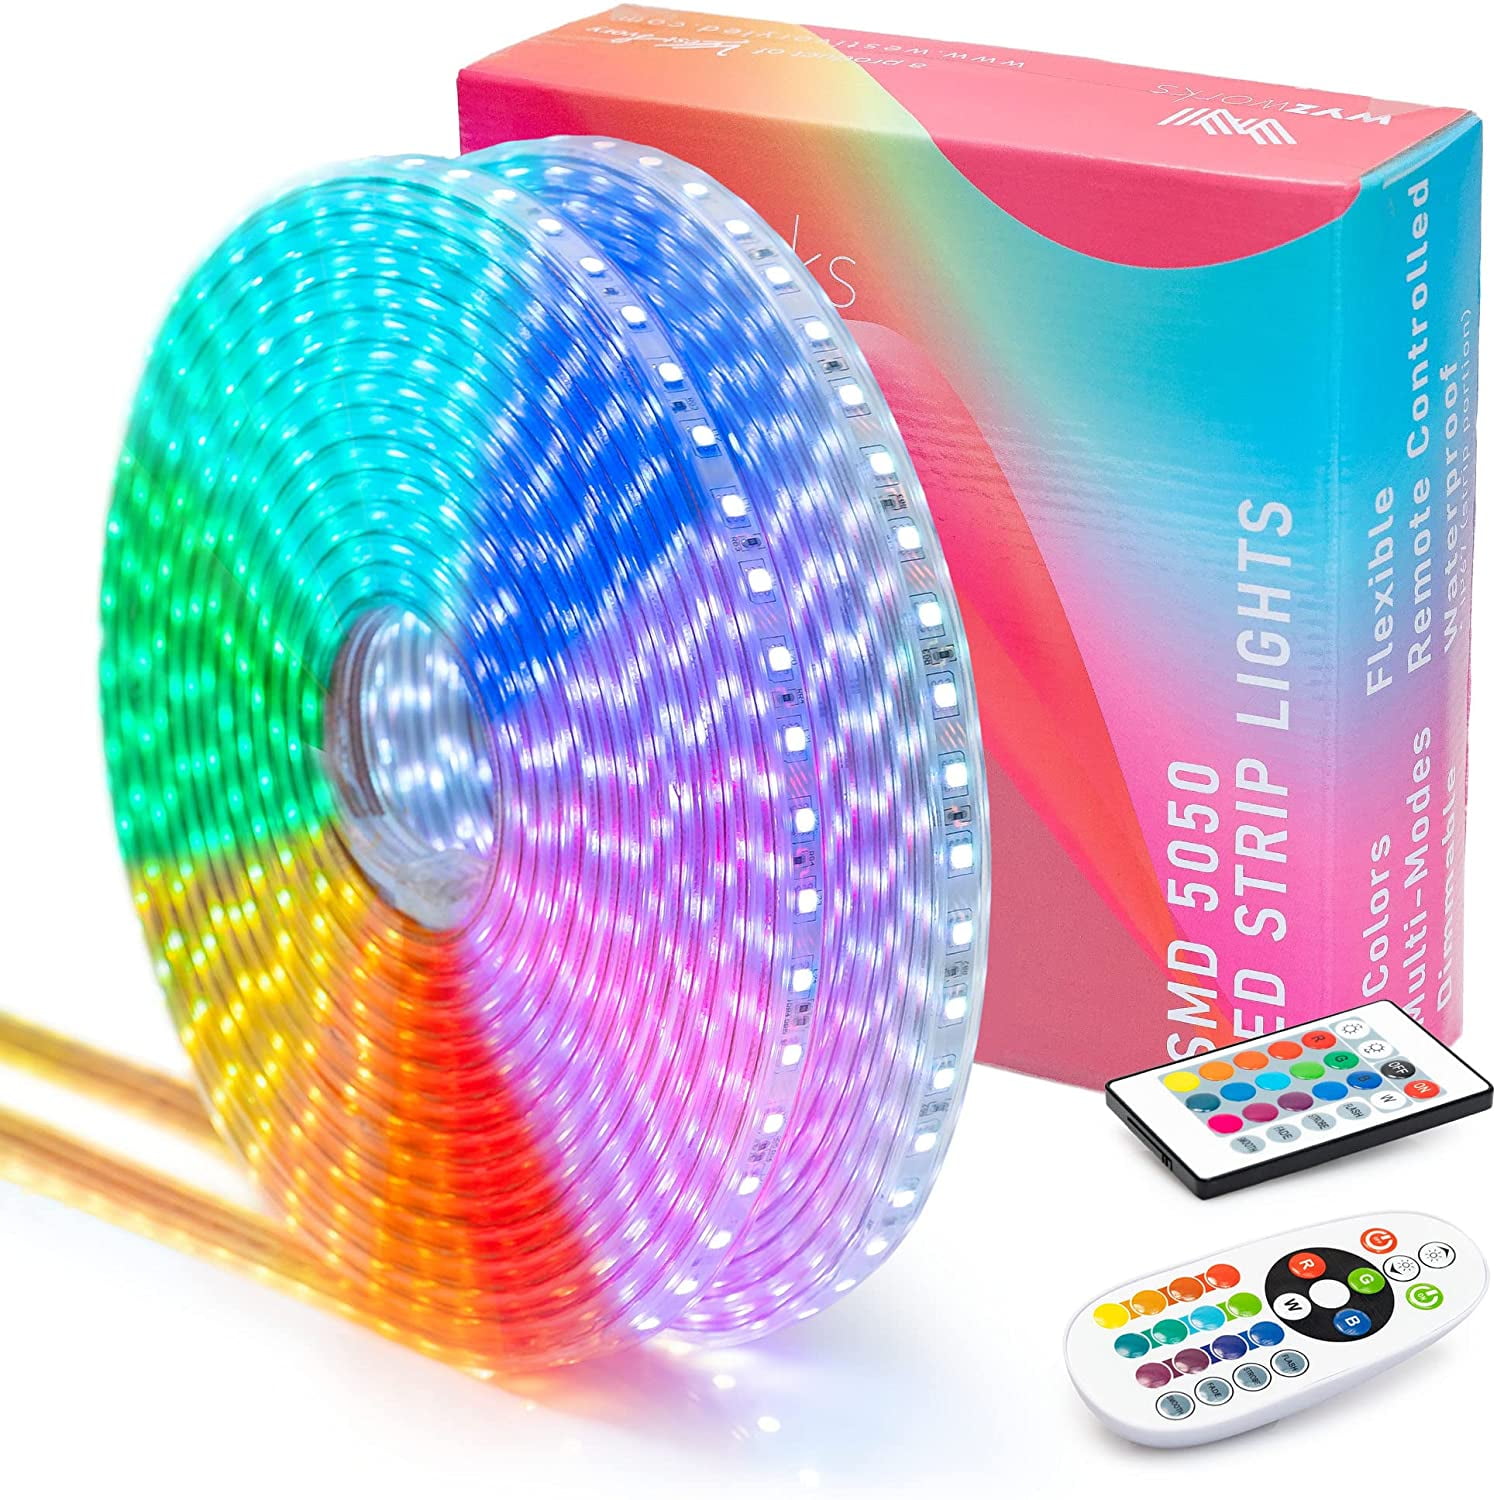 15M RGB+W WIFI Ready Flexible Outdoor Holiday 5050 110V LED Strip Light 49.2ft 